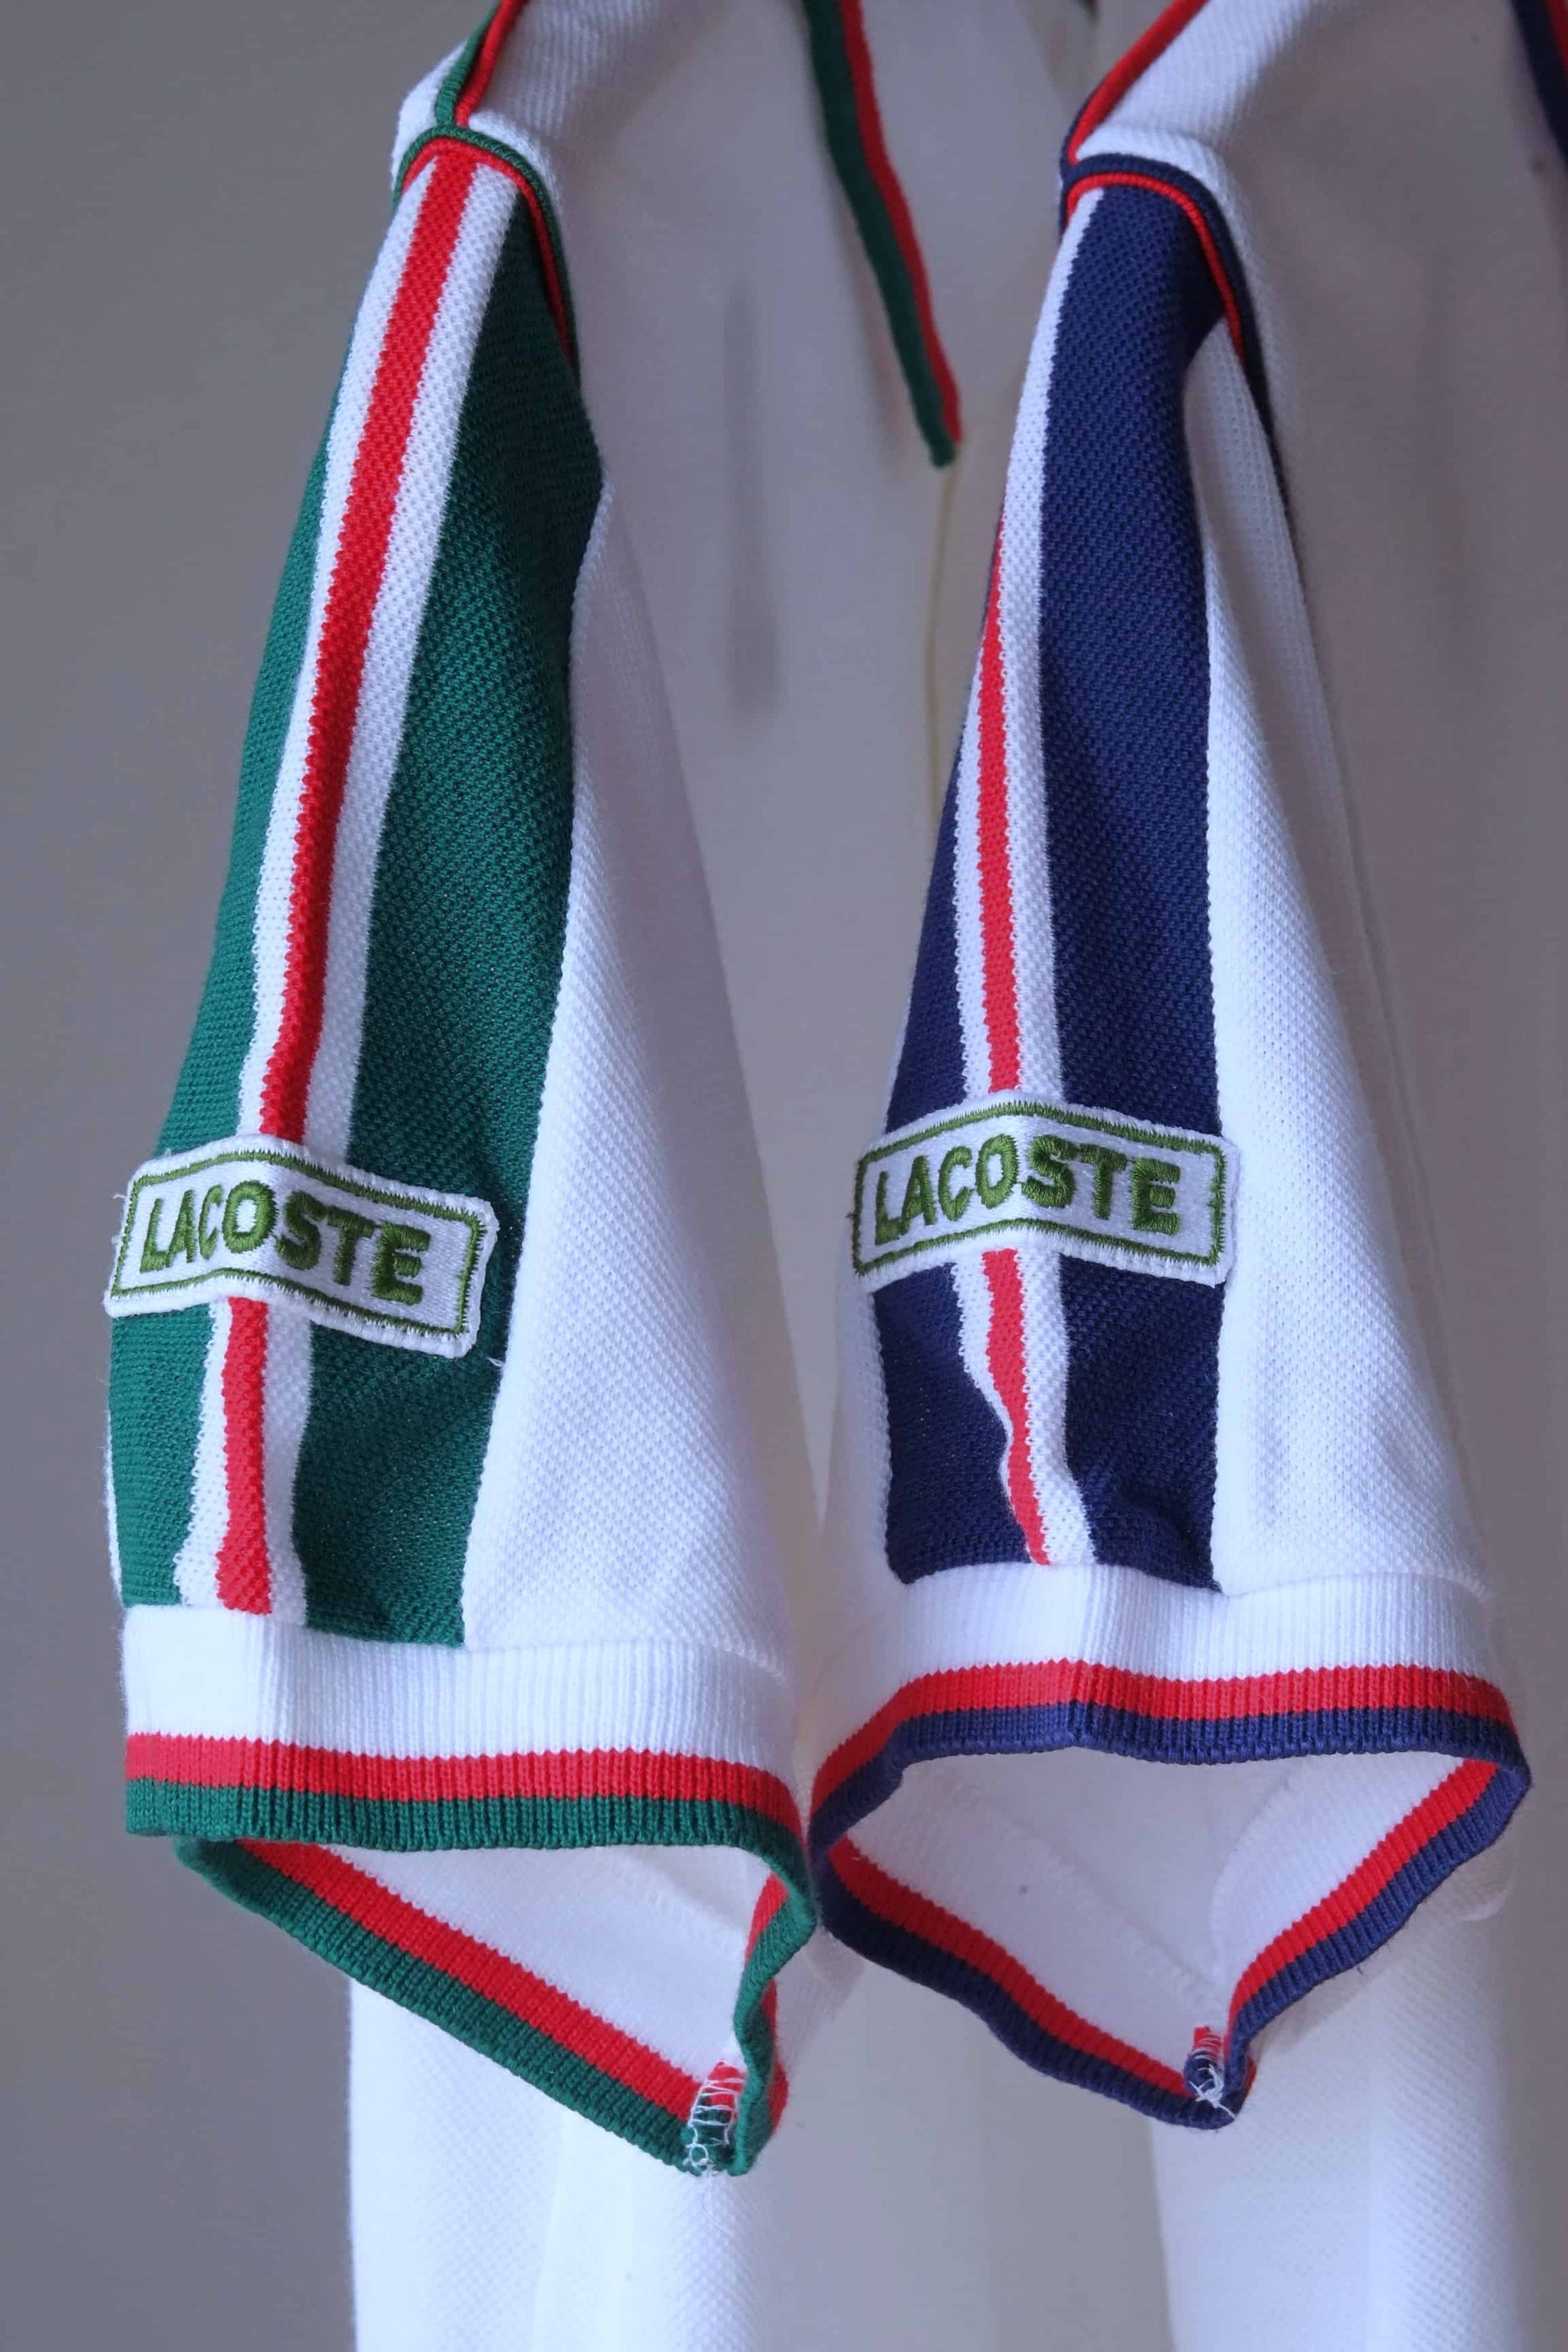 Lacoste vintage shirt in white and green stripes and white with navy stripes, slose up of sleeves